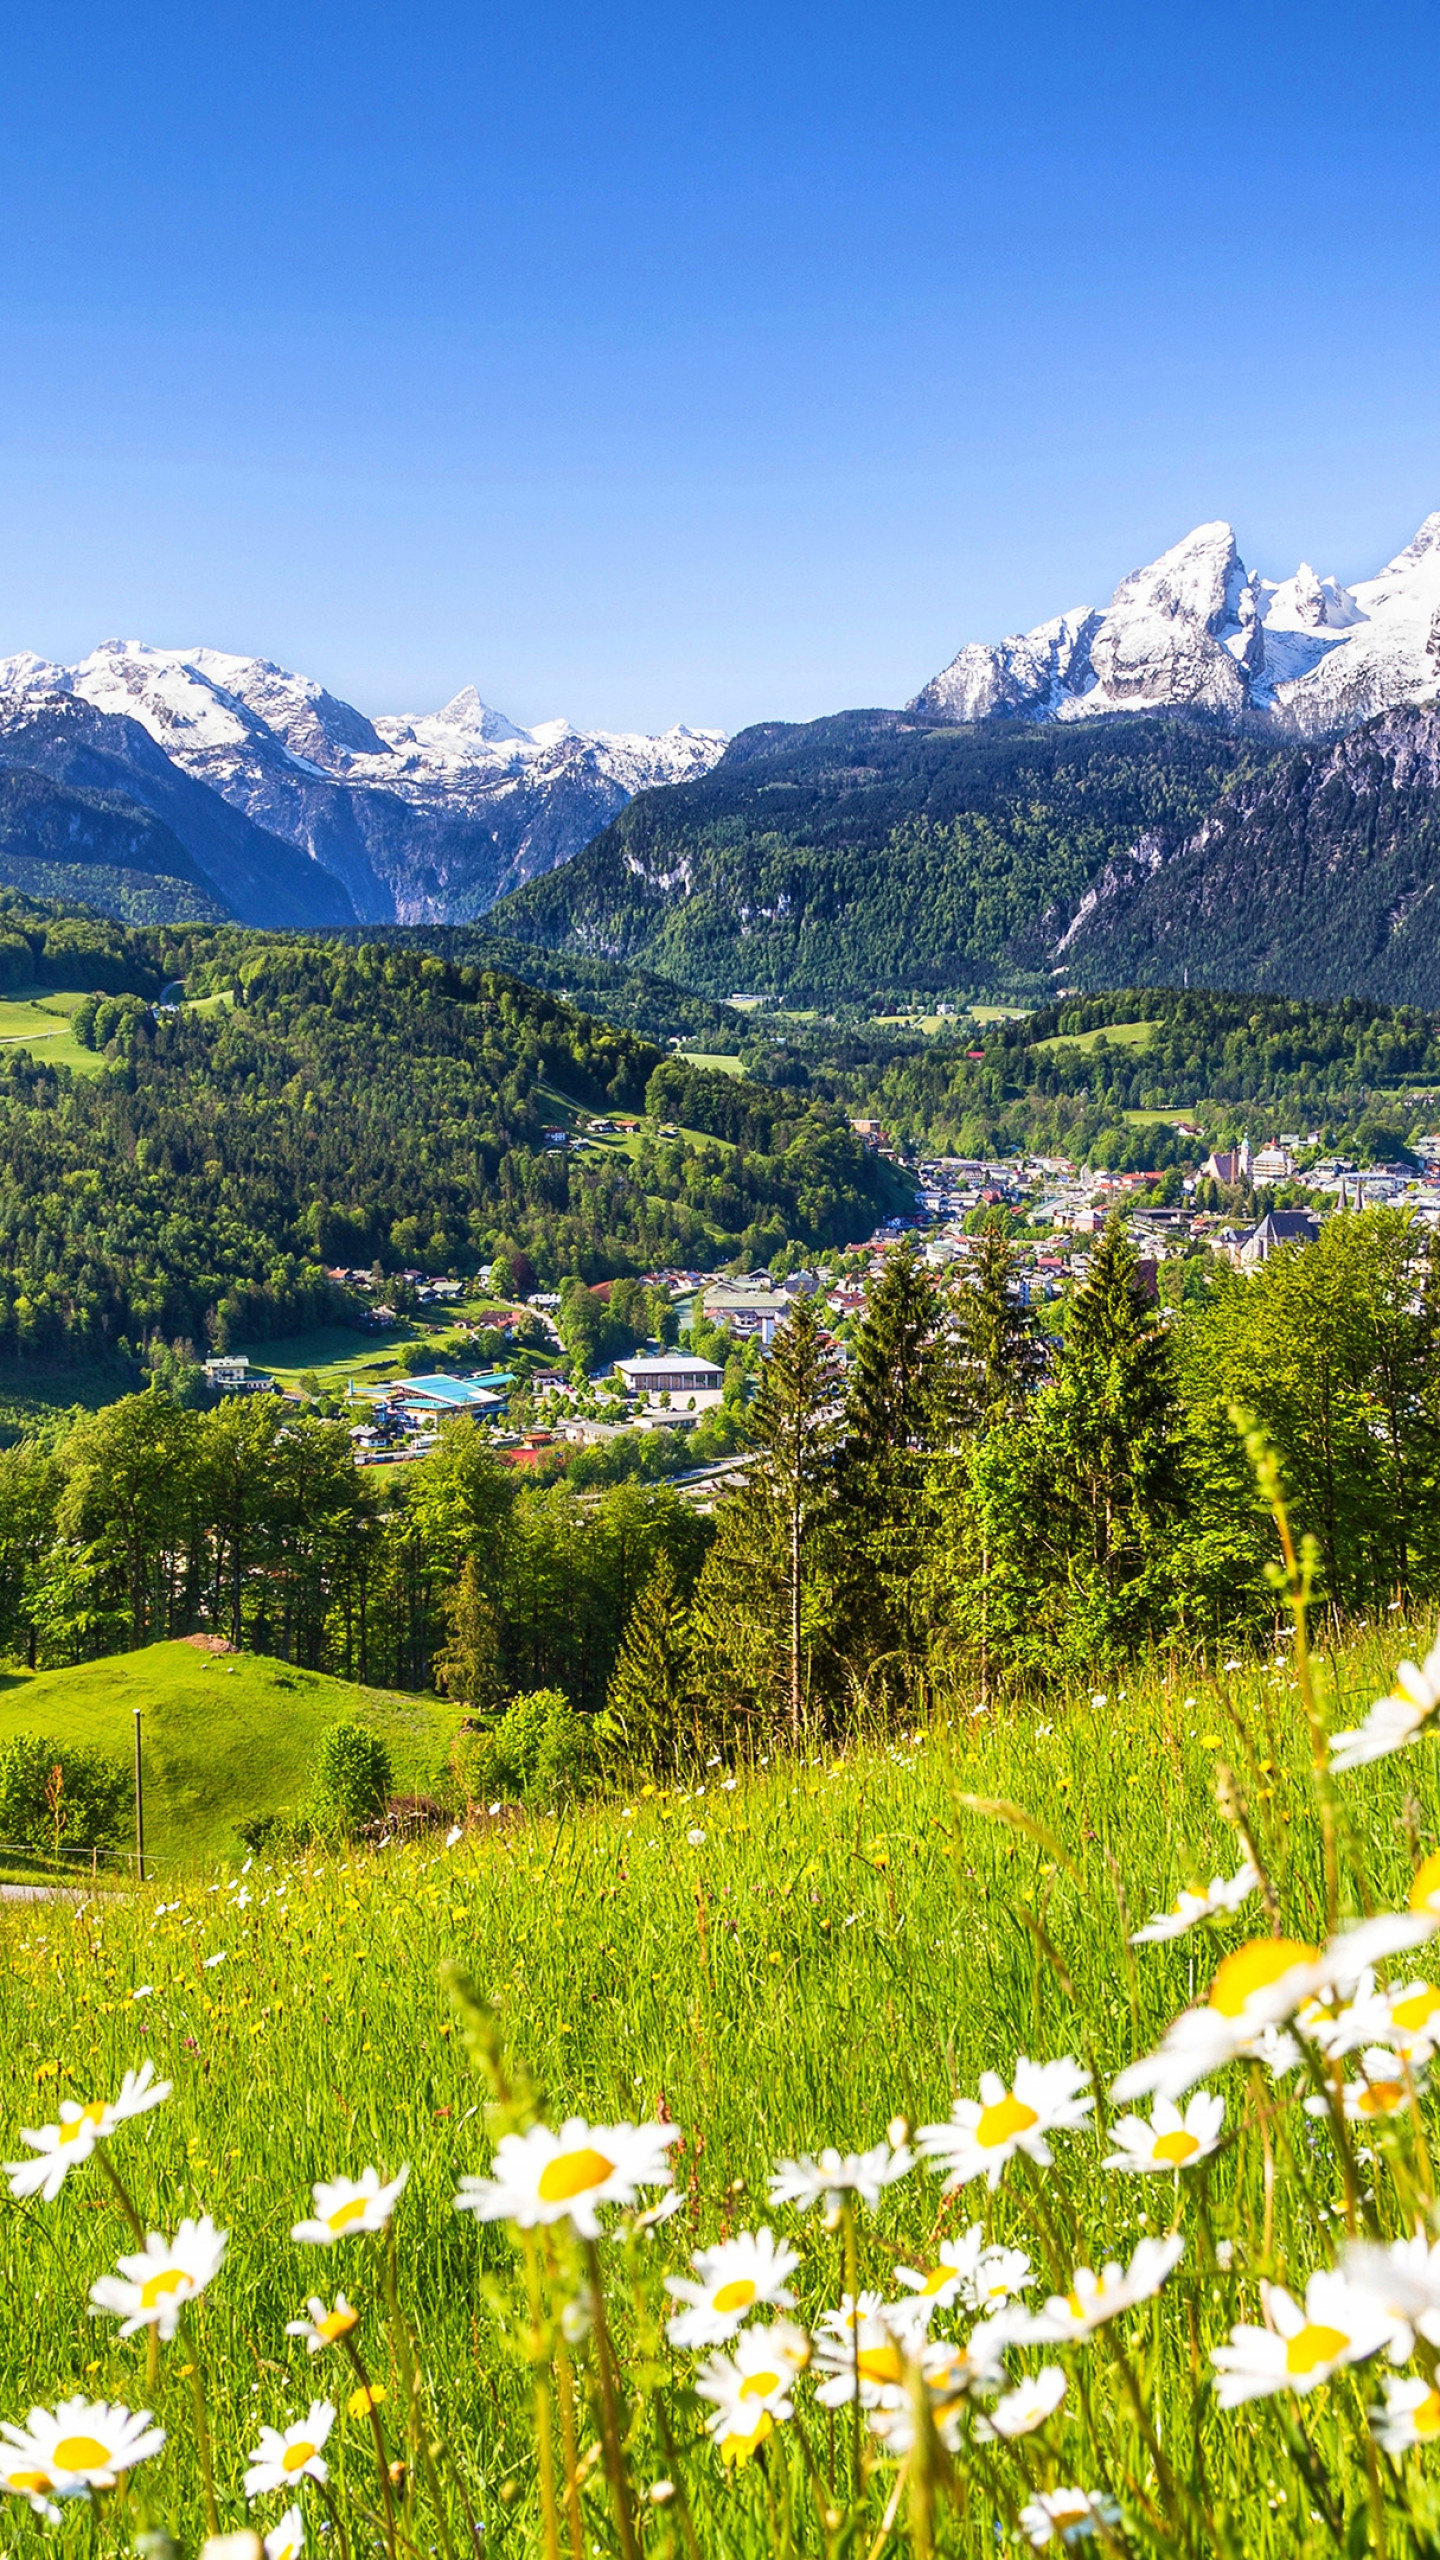 Wallpaper Alps, 5k, 4k wallpaper, Germany, Meadows, mountains, grass,  daisies, Nature #5524 - Page 4